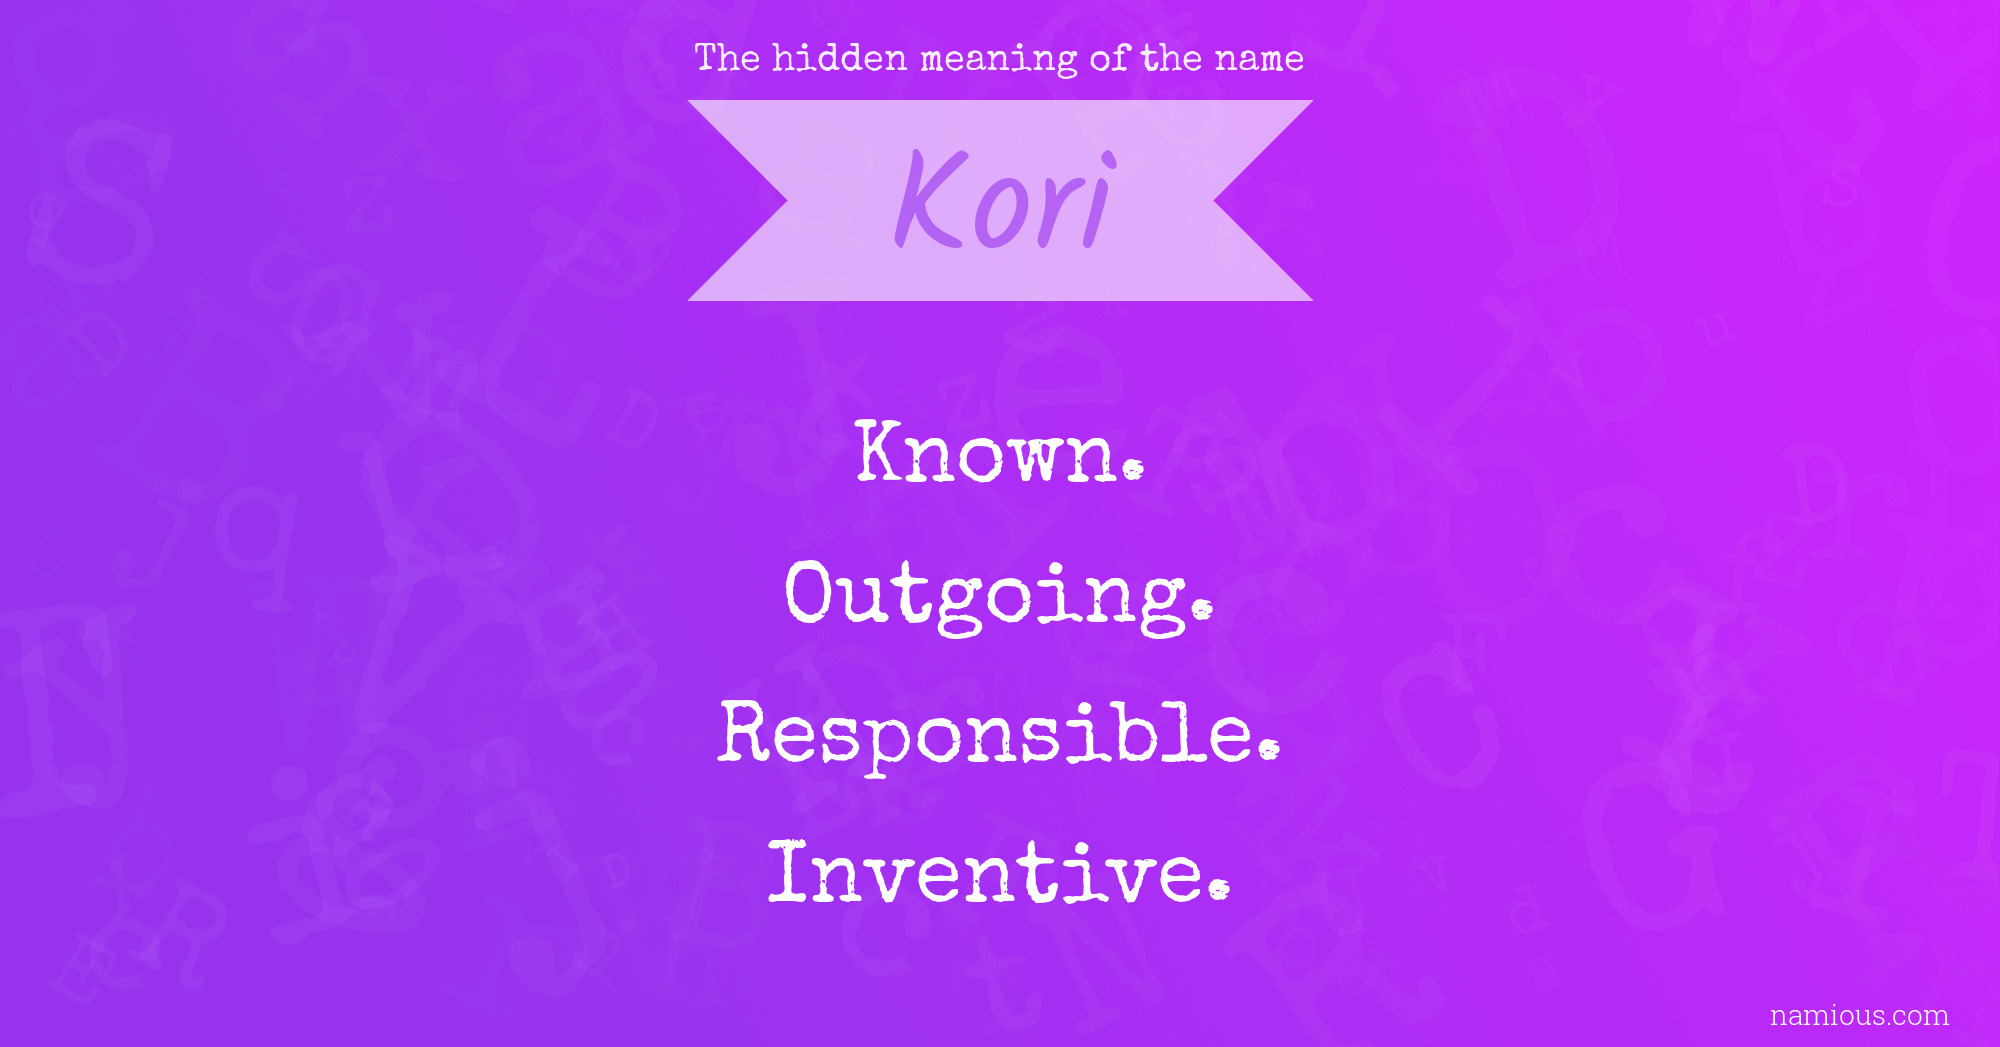 The hidden meaning of the name Kori